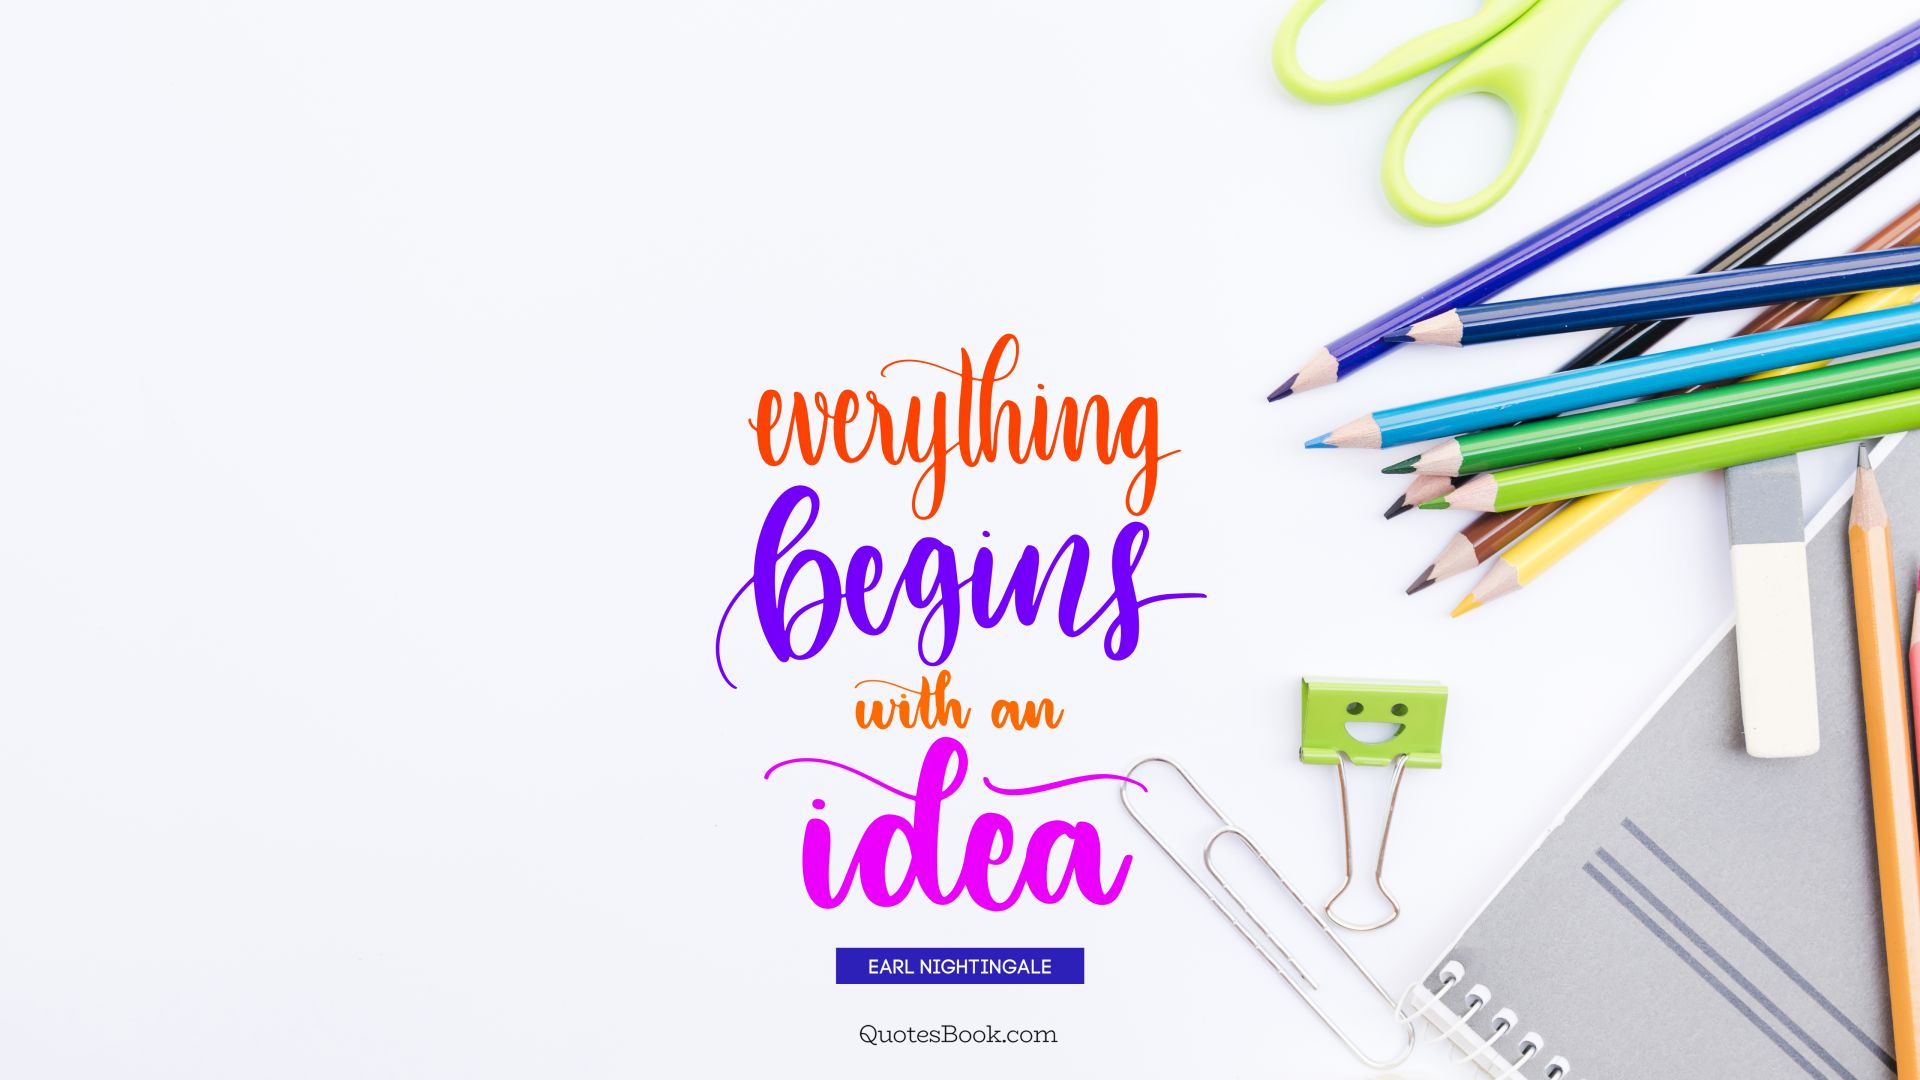 Everything begins with an idea. - Quote by Earl Nightingale